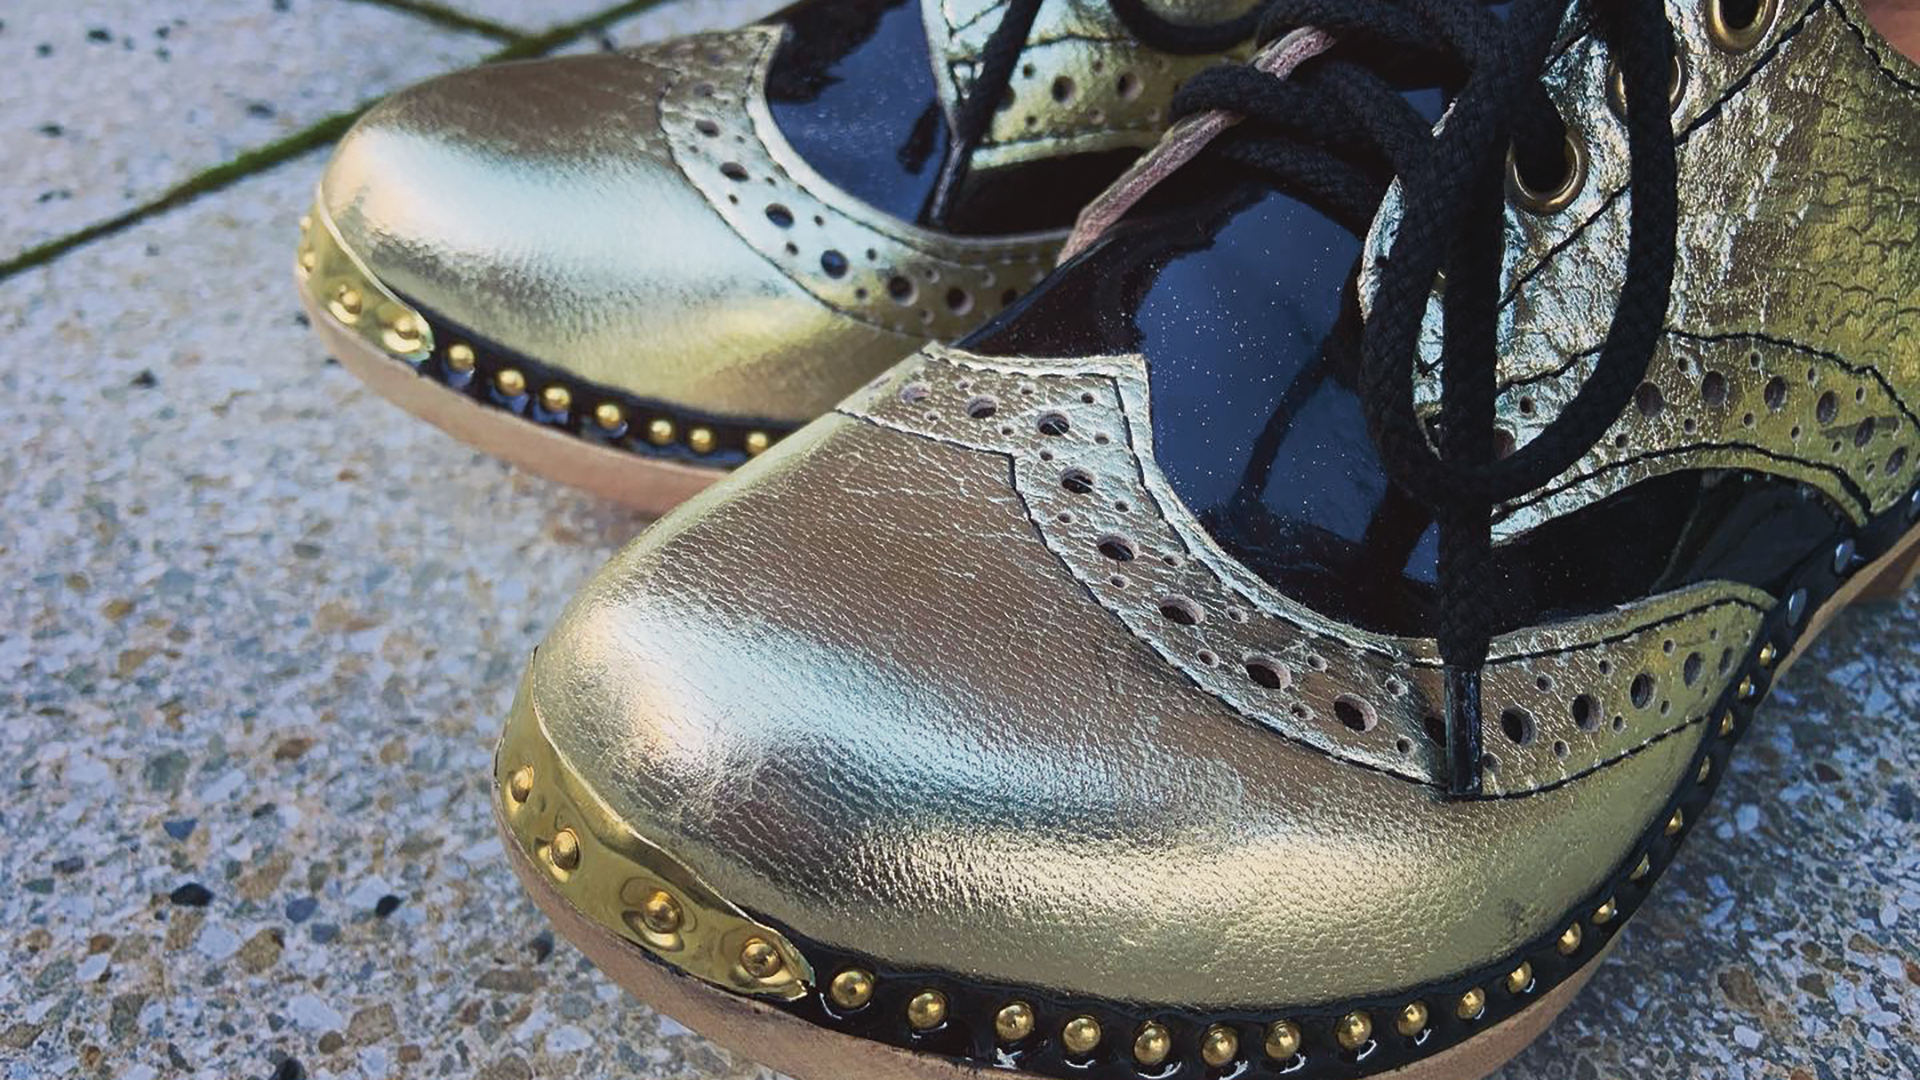 Simon recently received an order for three matching pairs of brogue clogs in black patent leather and metallic gold mock snakeskin